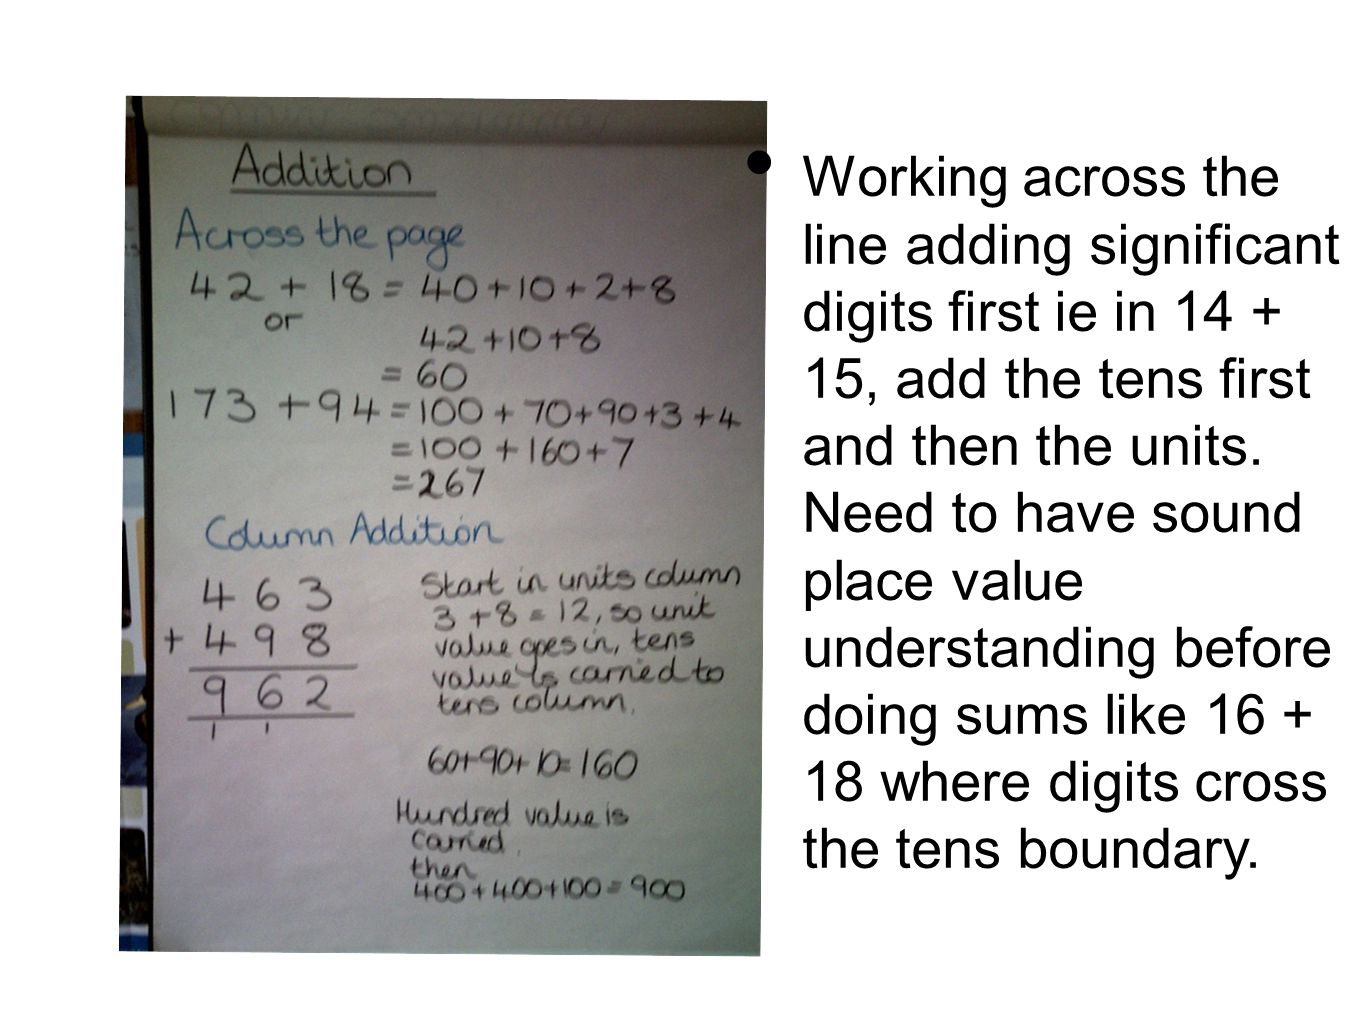 Working across the line adding significant digits first ie in , add the tens first and then the units.